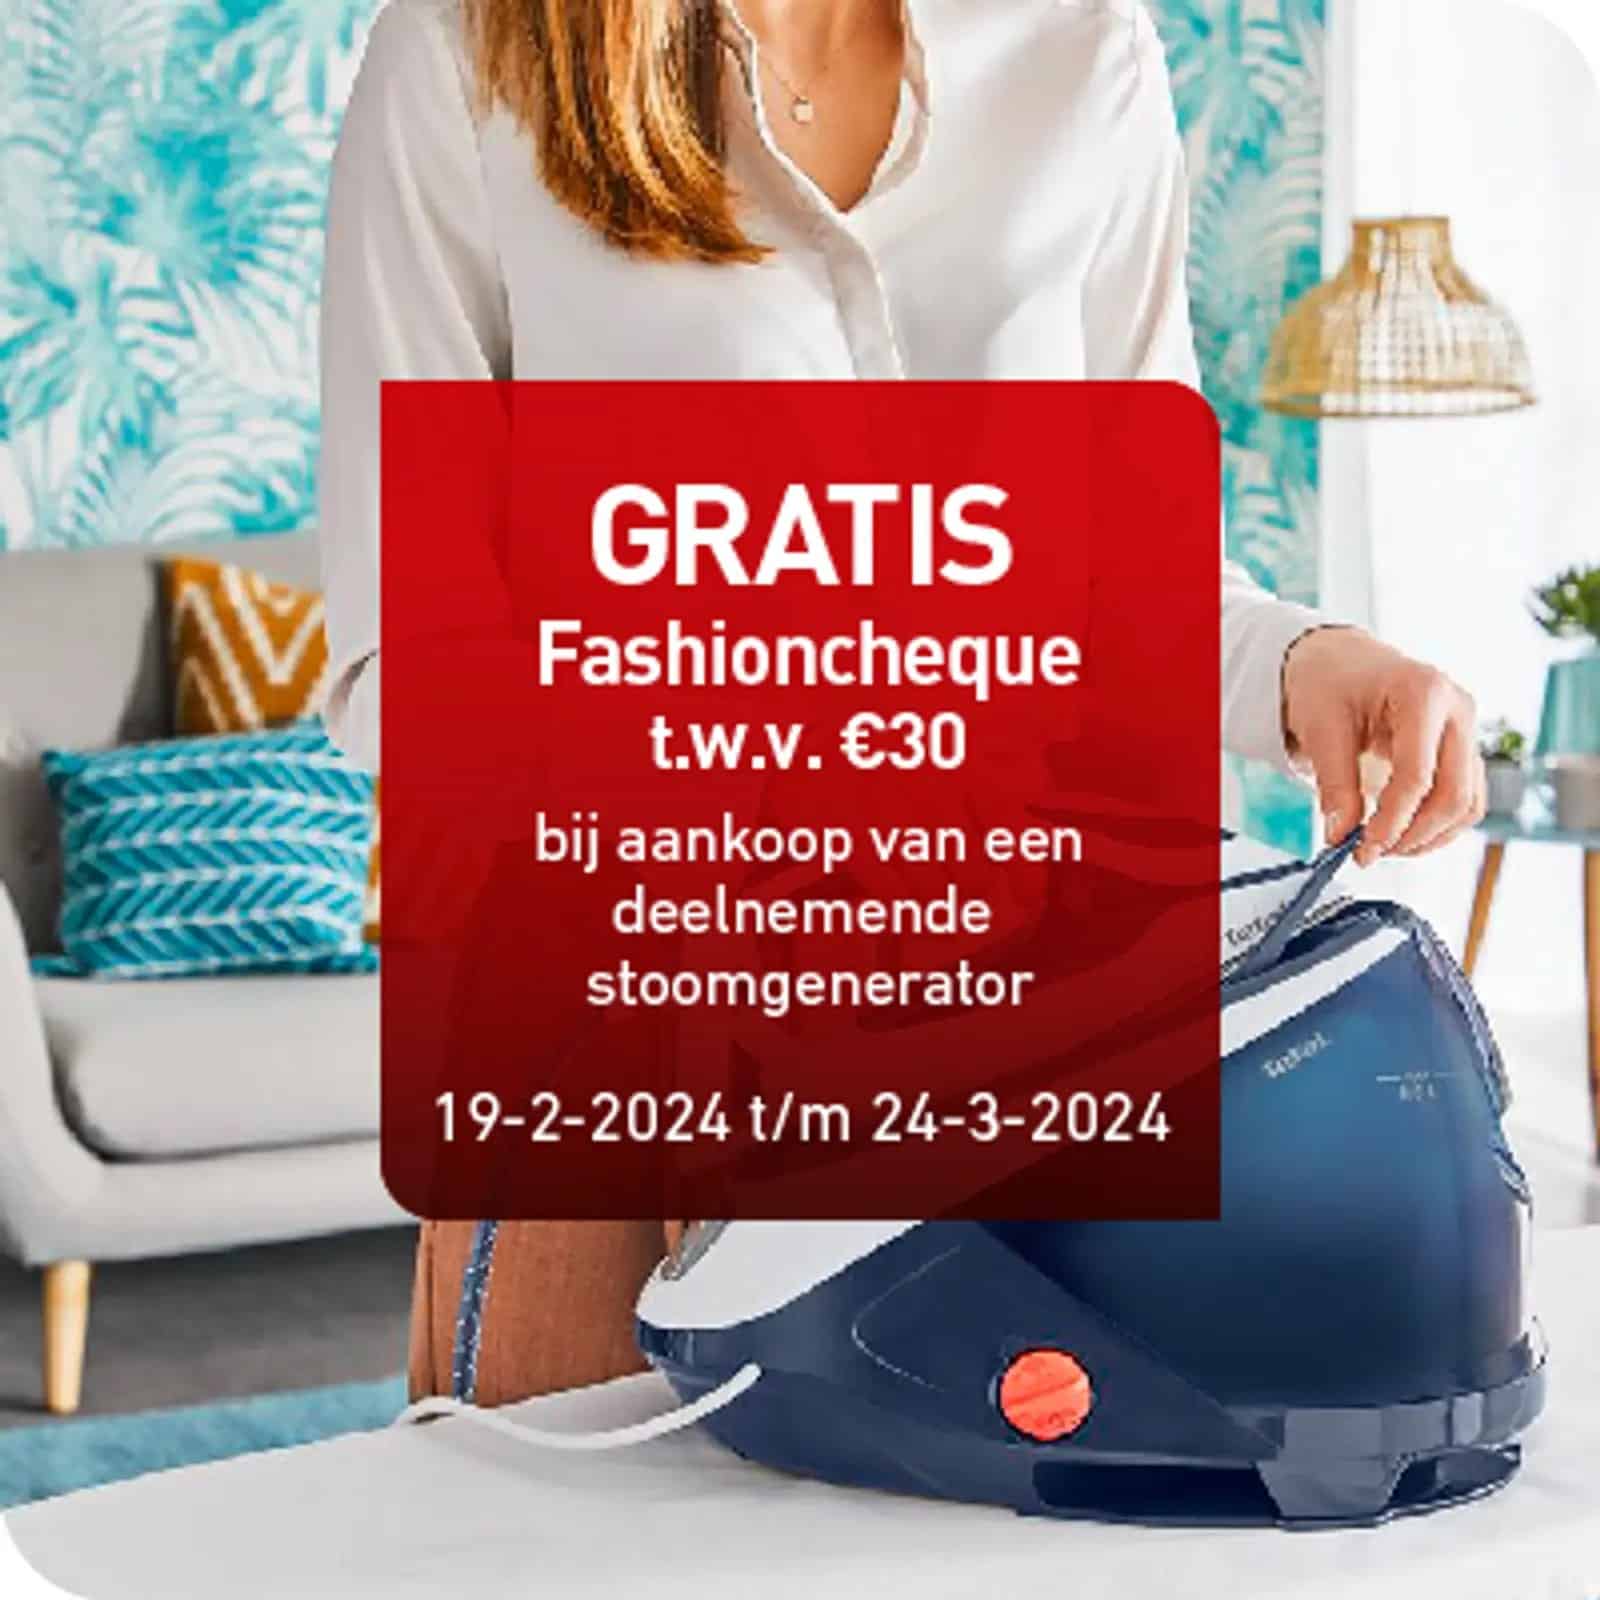 Gratis Fashioncheque in Tefal webshop